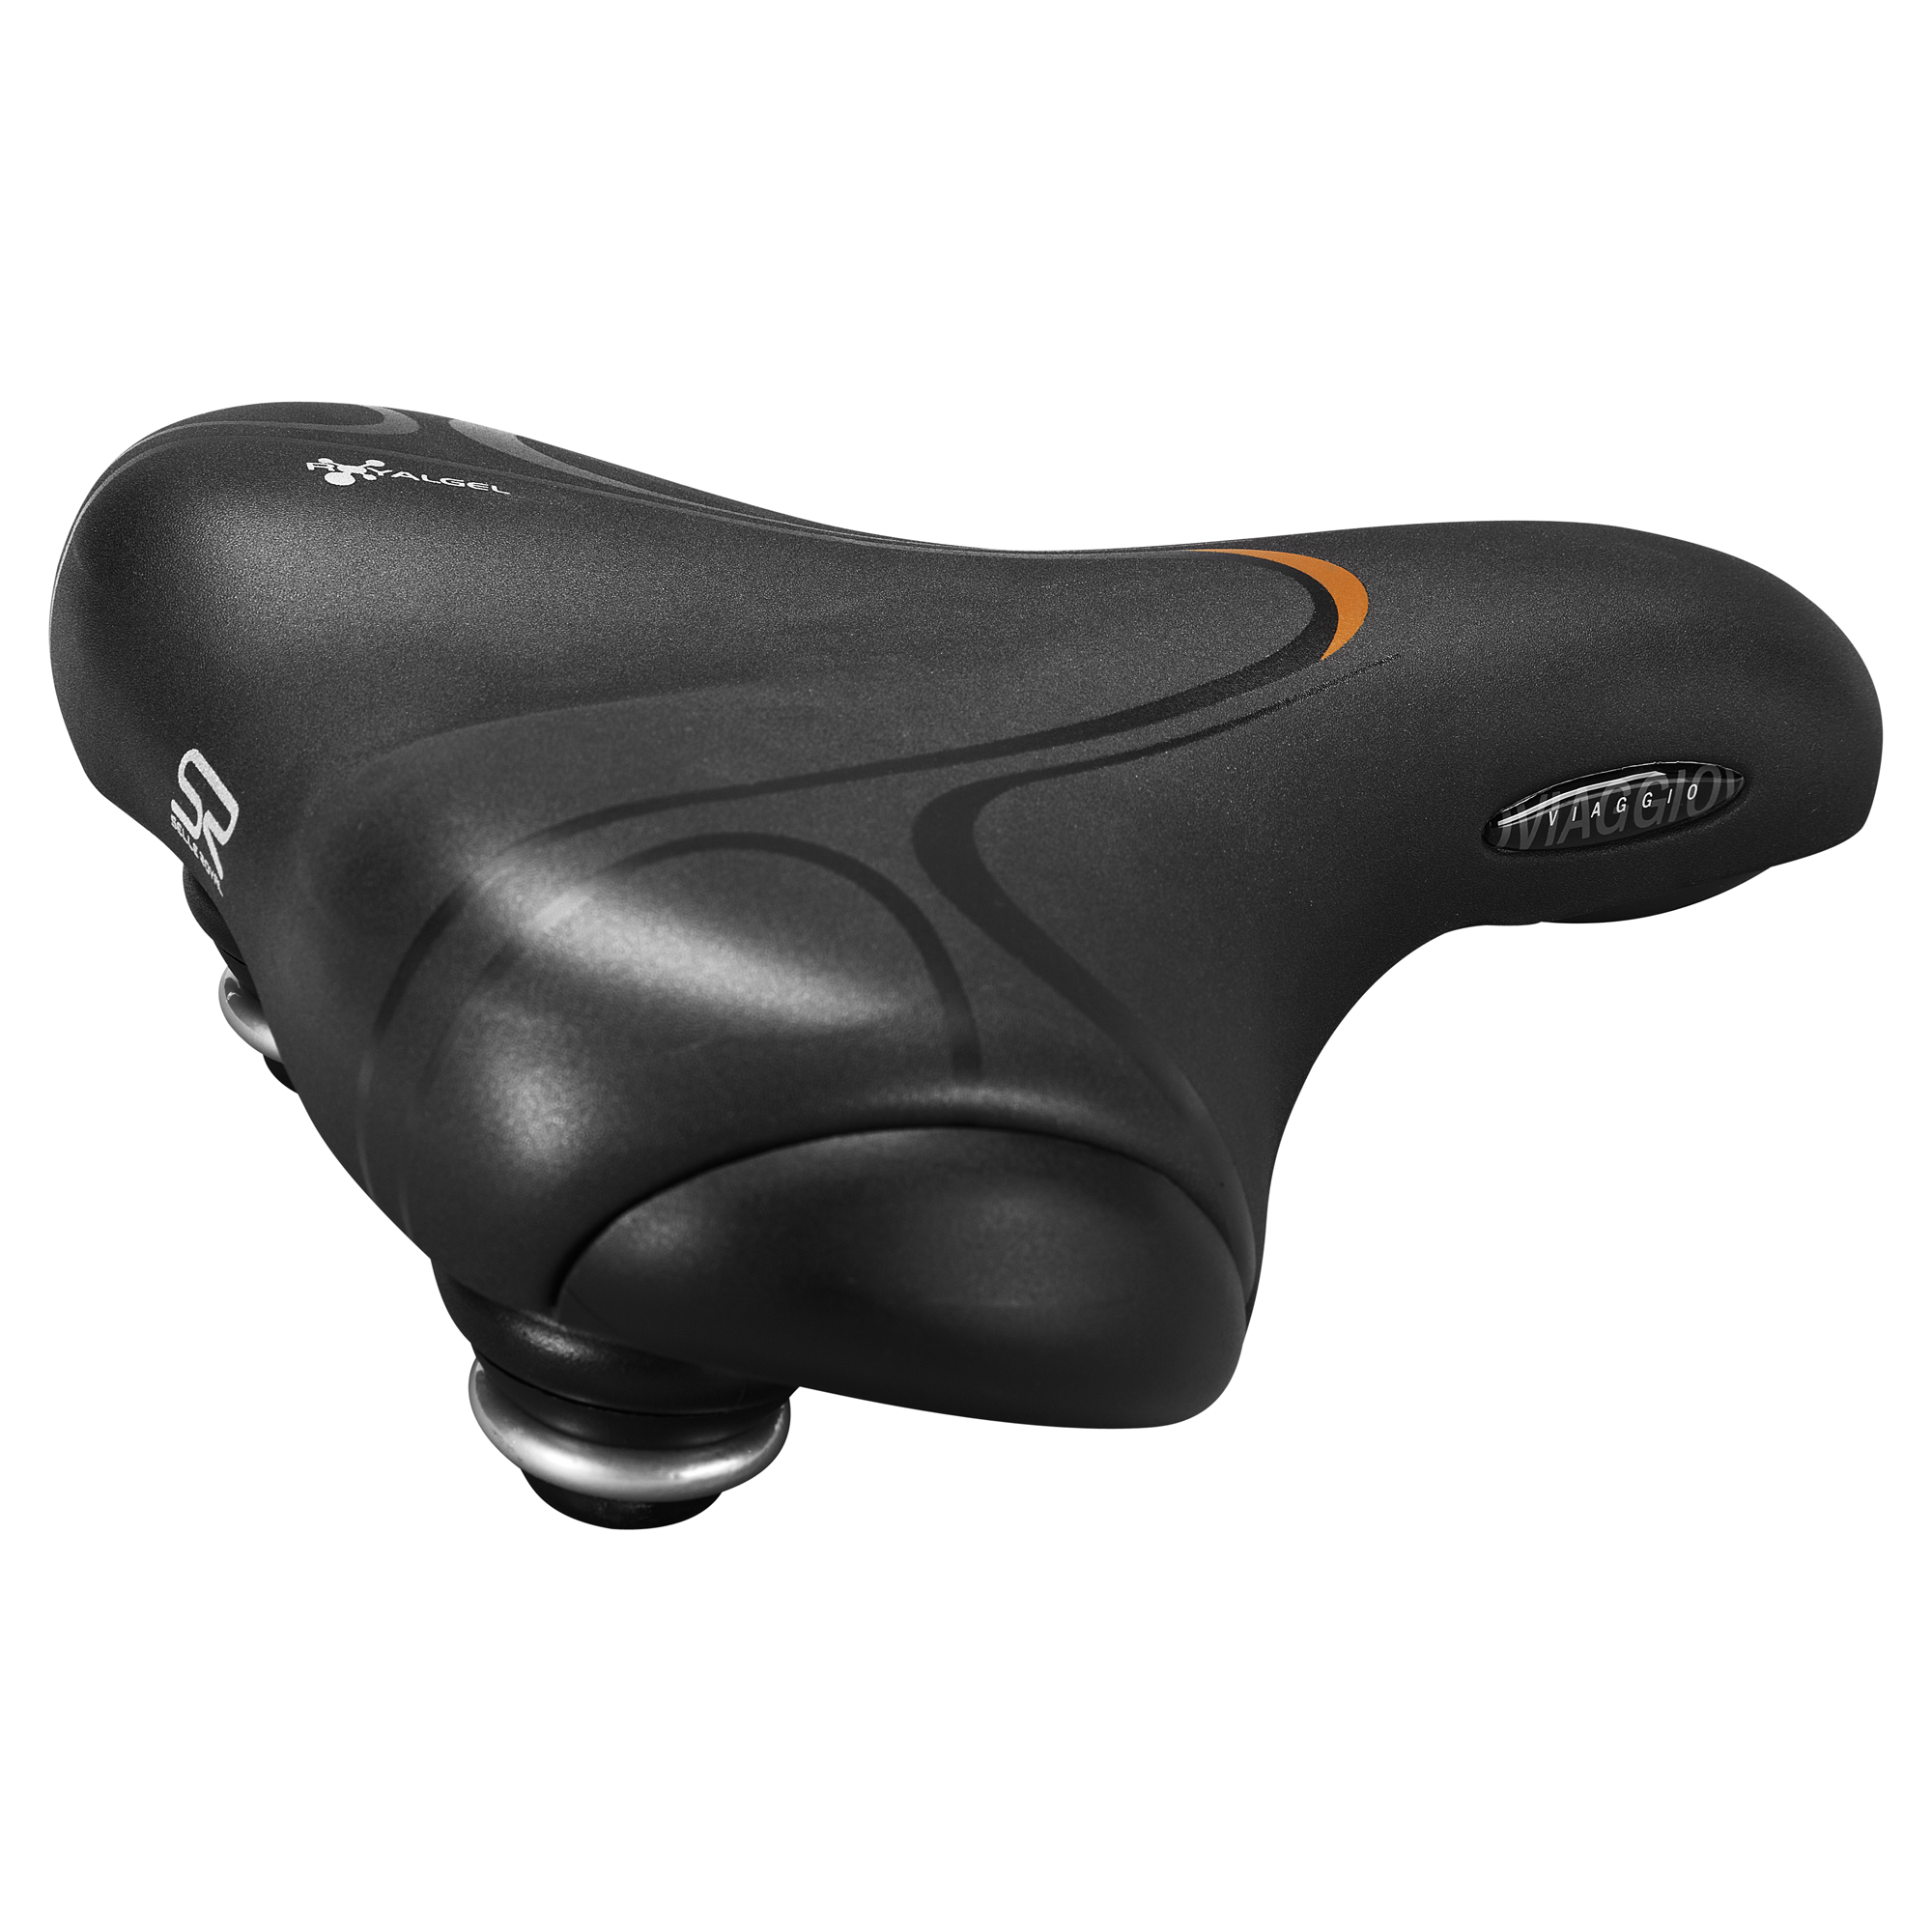 Cityradsattel "Selle Royal Viaggio" + product picture